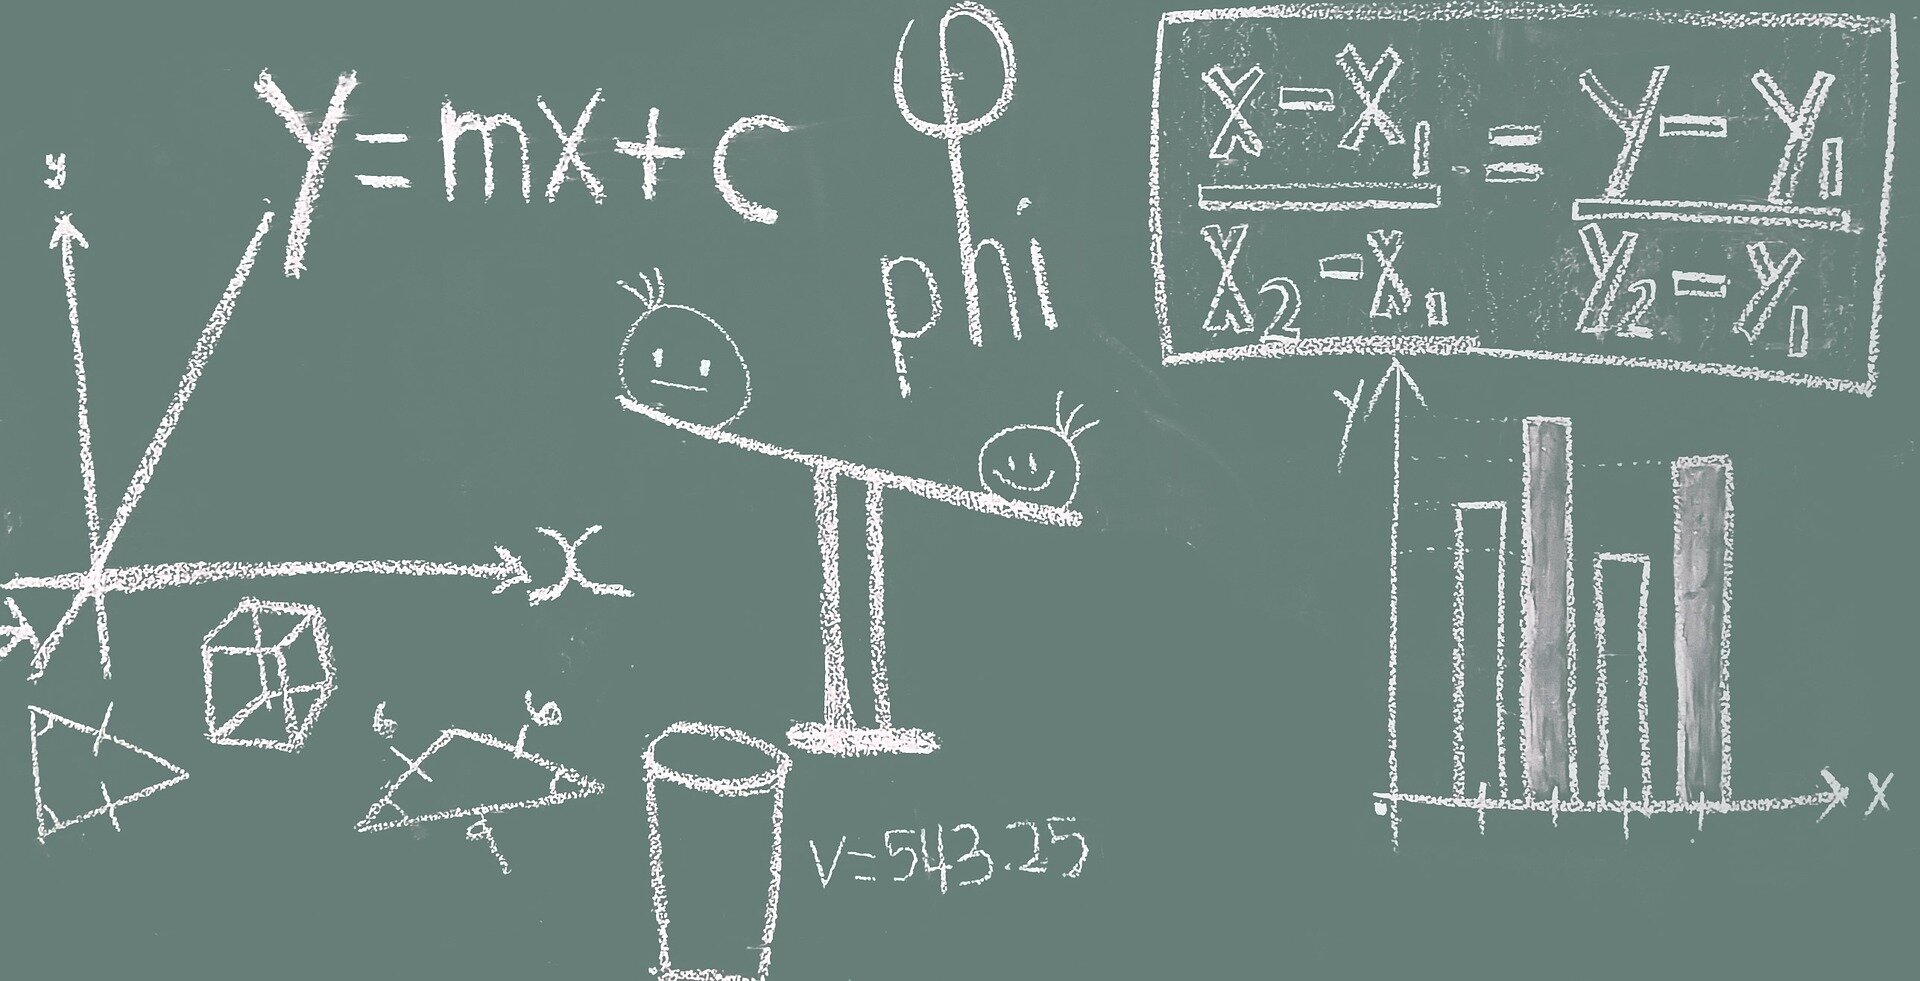 Are US teenagers more likely than others to exaggerate their math abilities? Study says yes